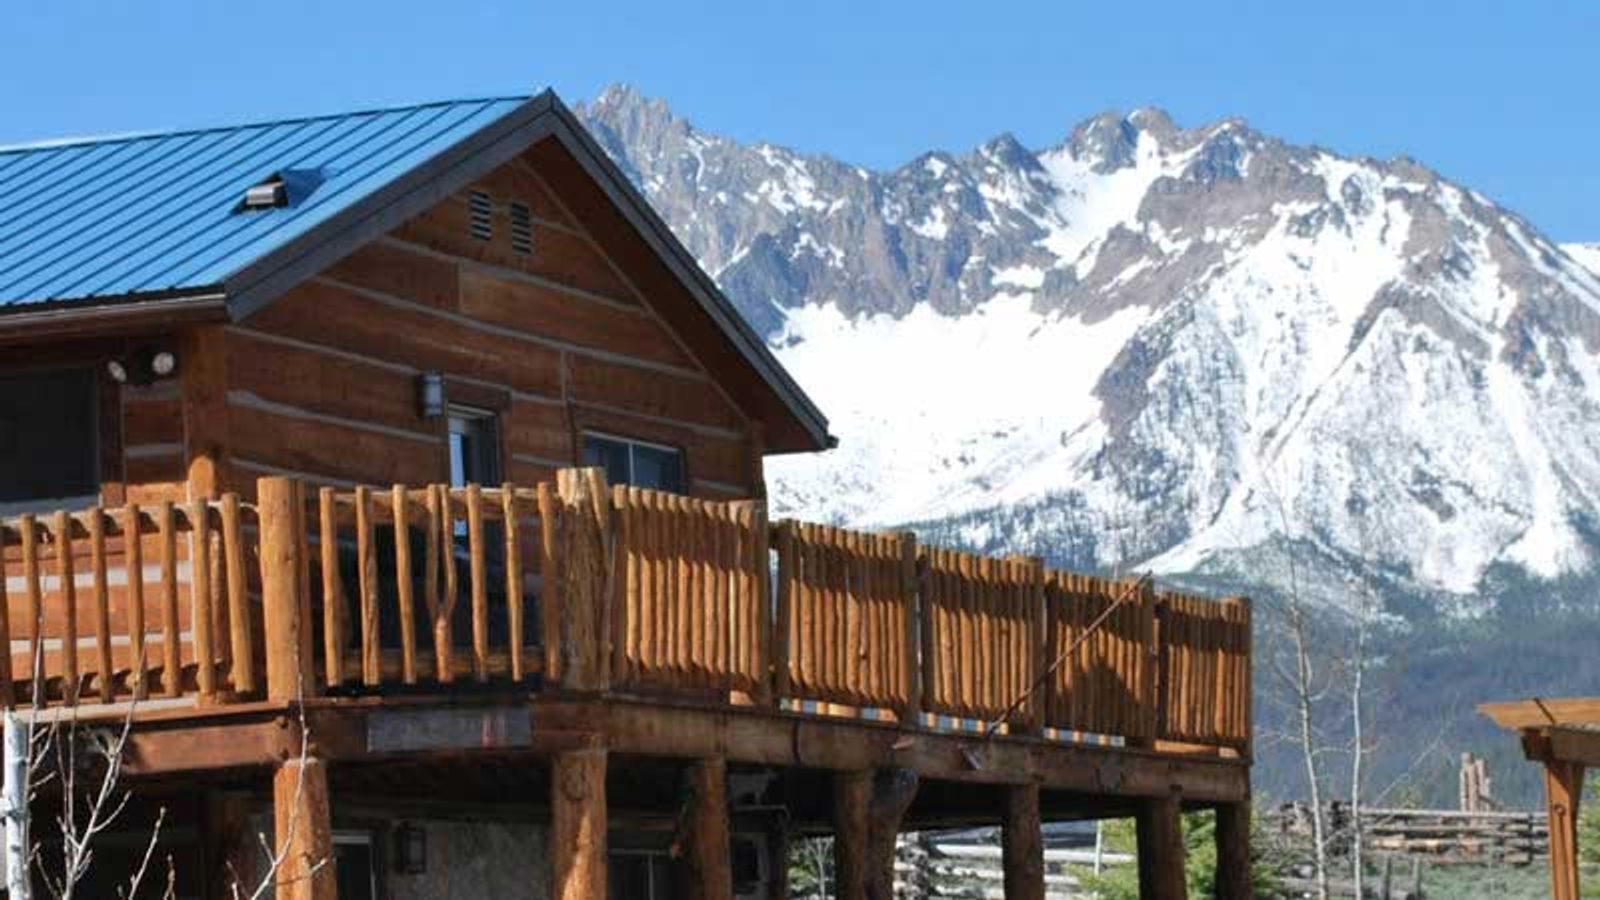 A raised cabin with beautiful mountains in the background